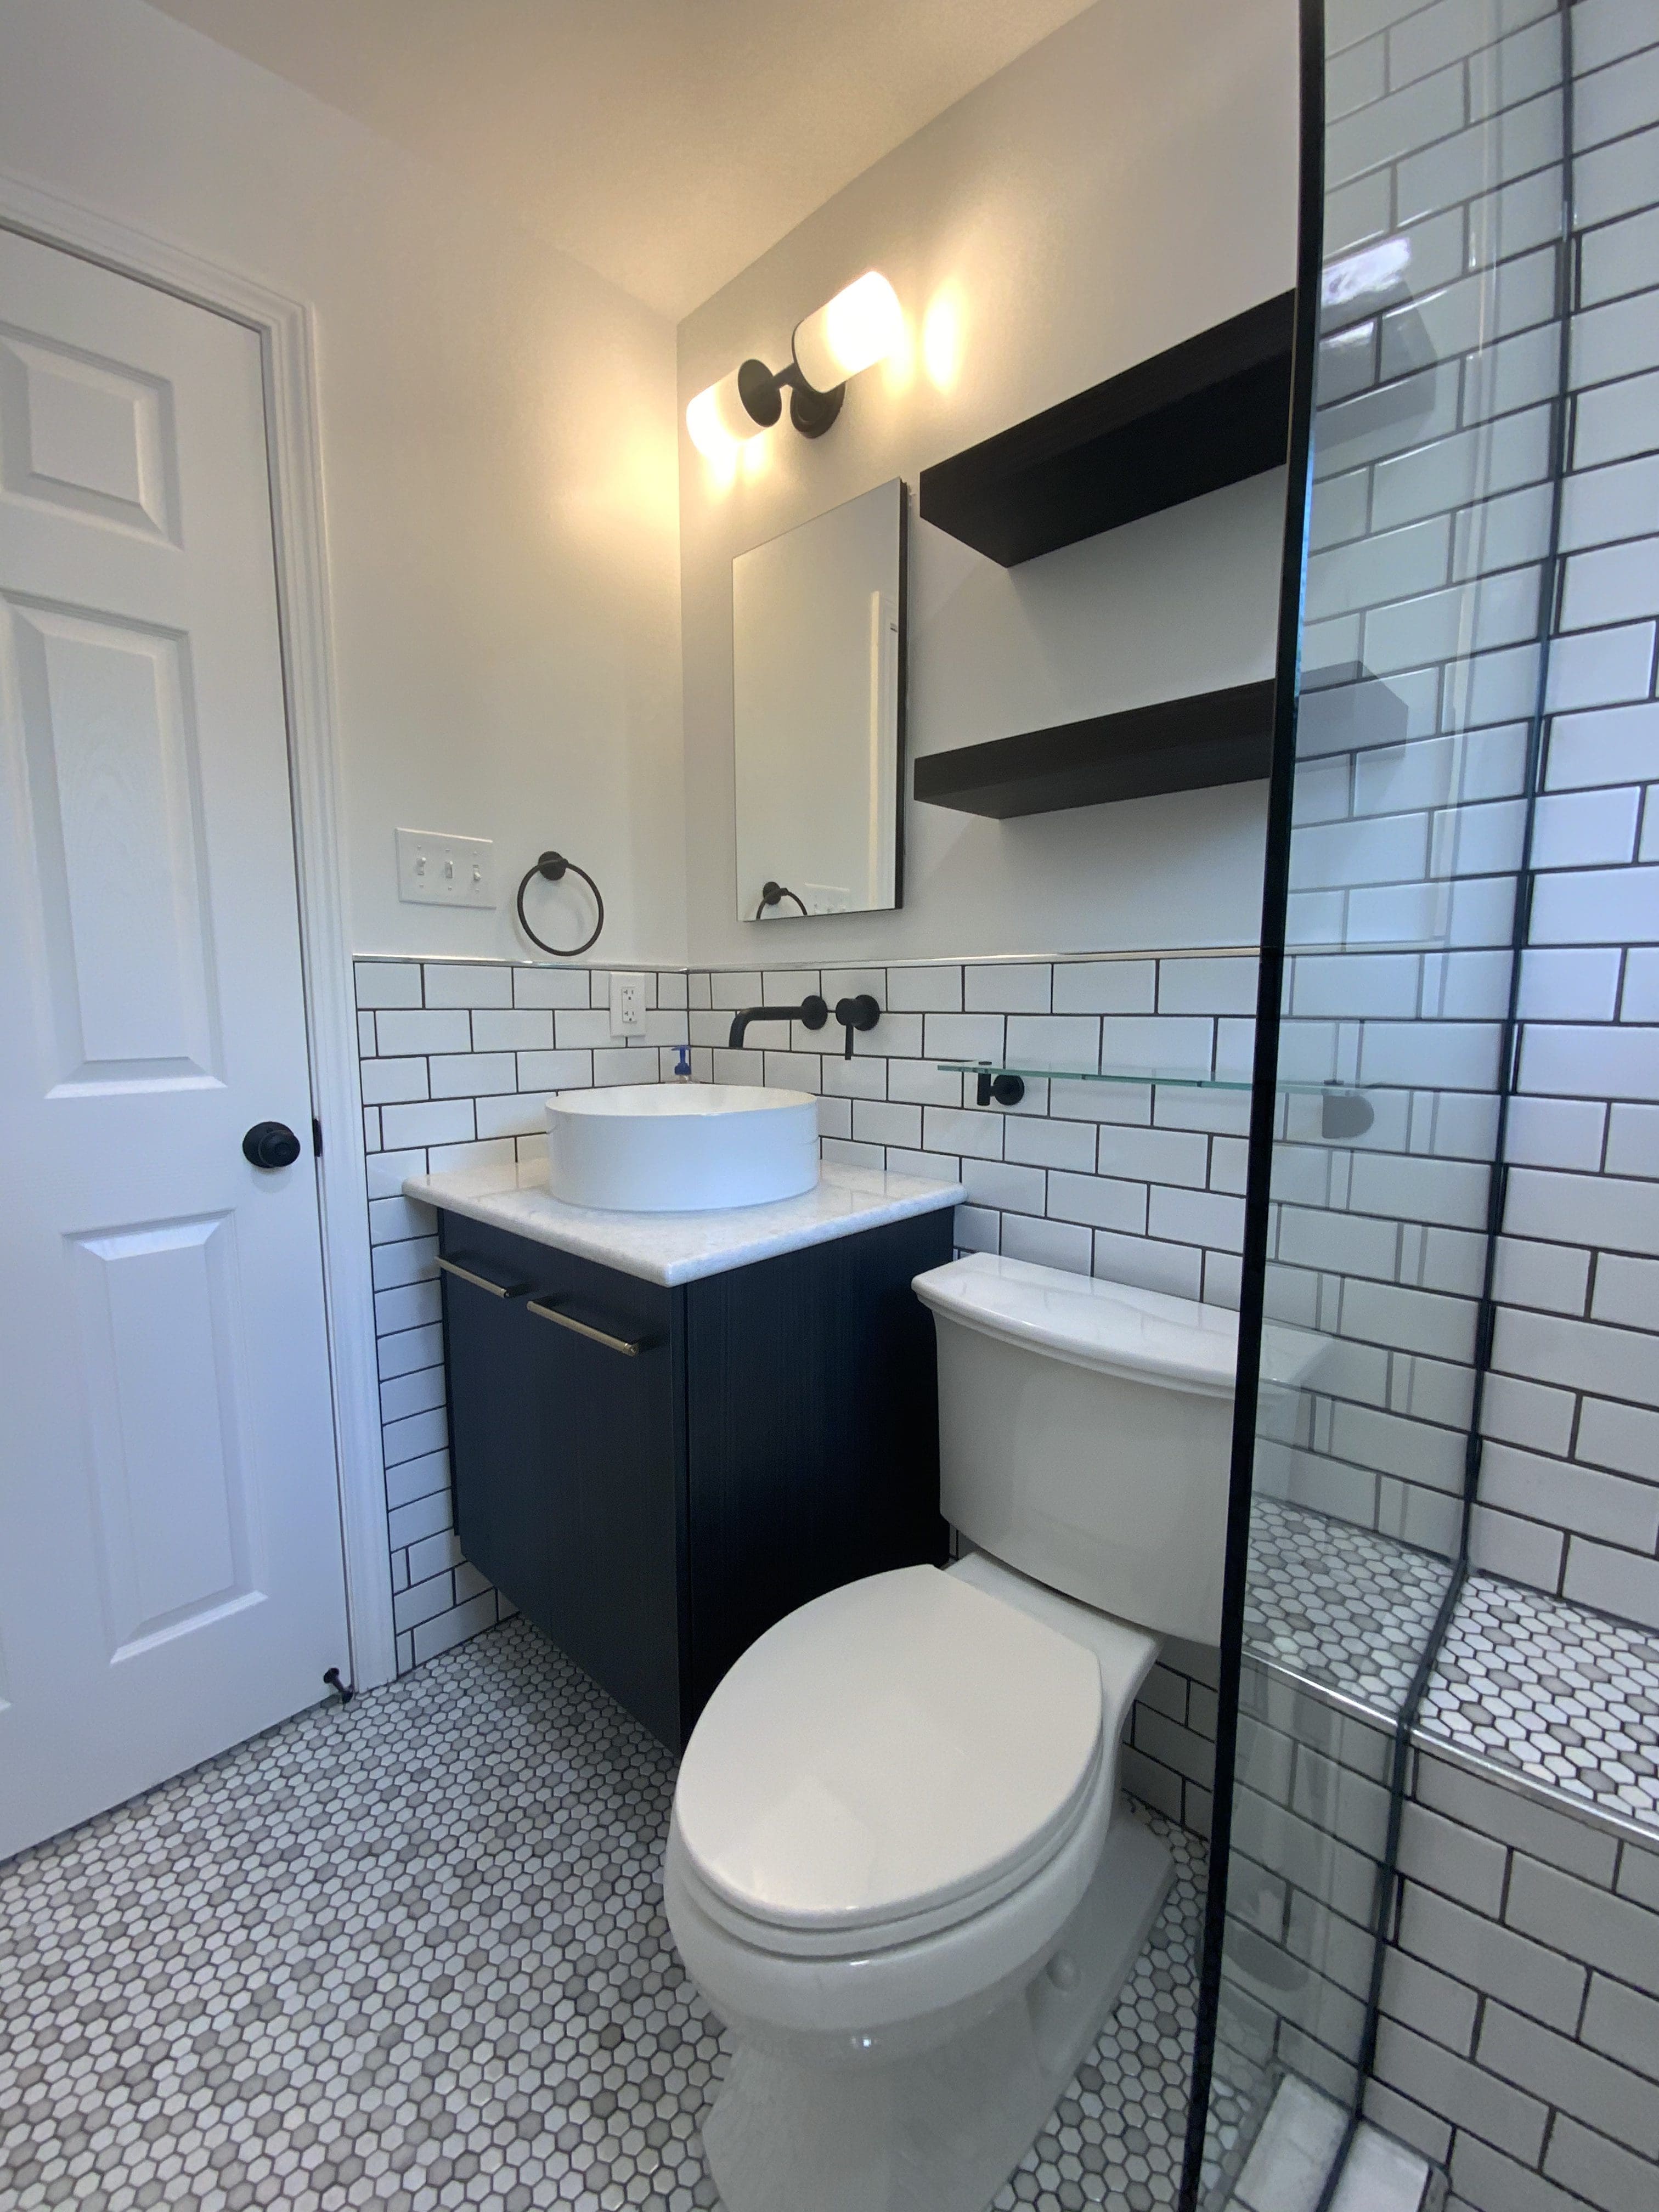 Small luxury bathroom in a black and white color scheme used to demonstrate how expensive bathroom remodeling is.